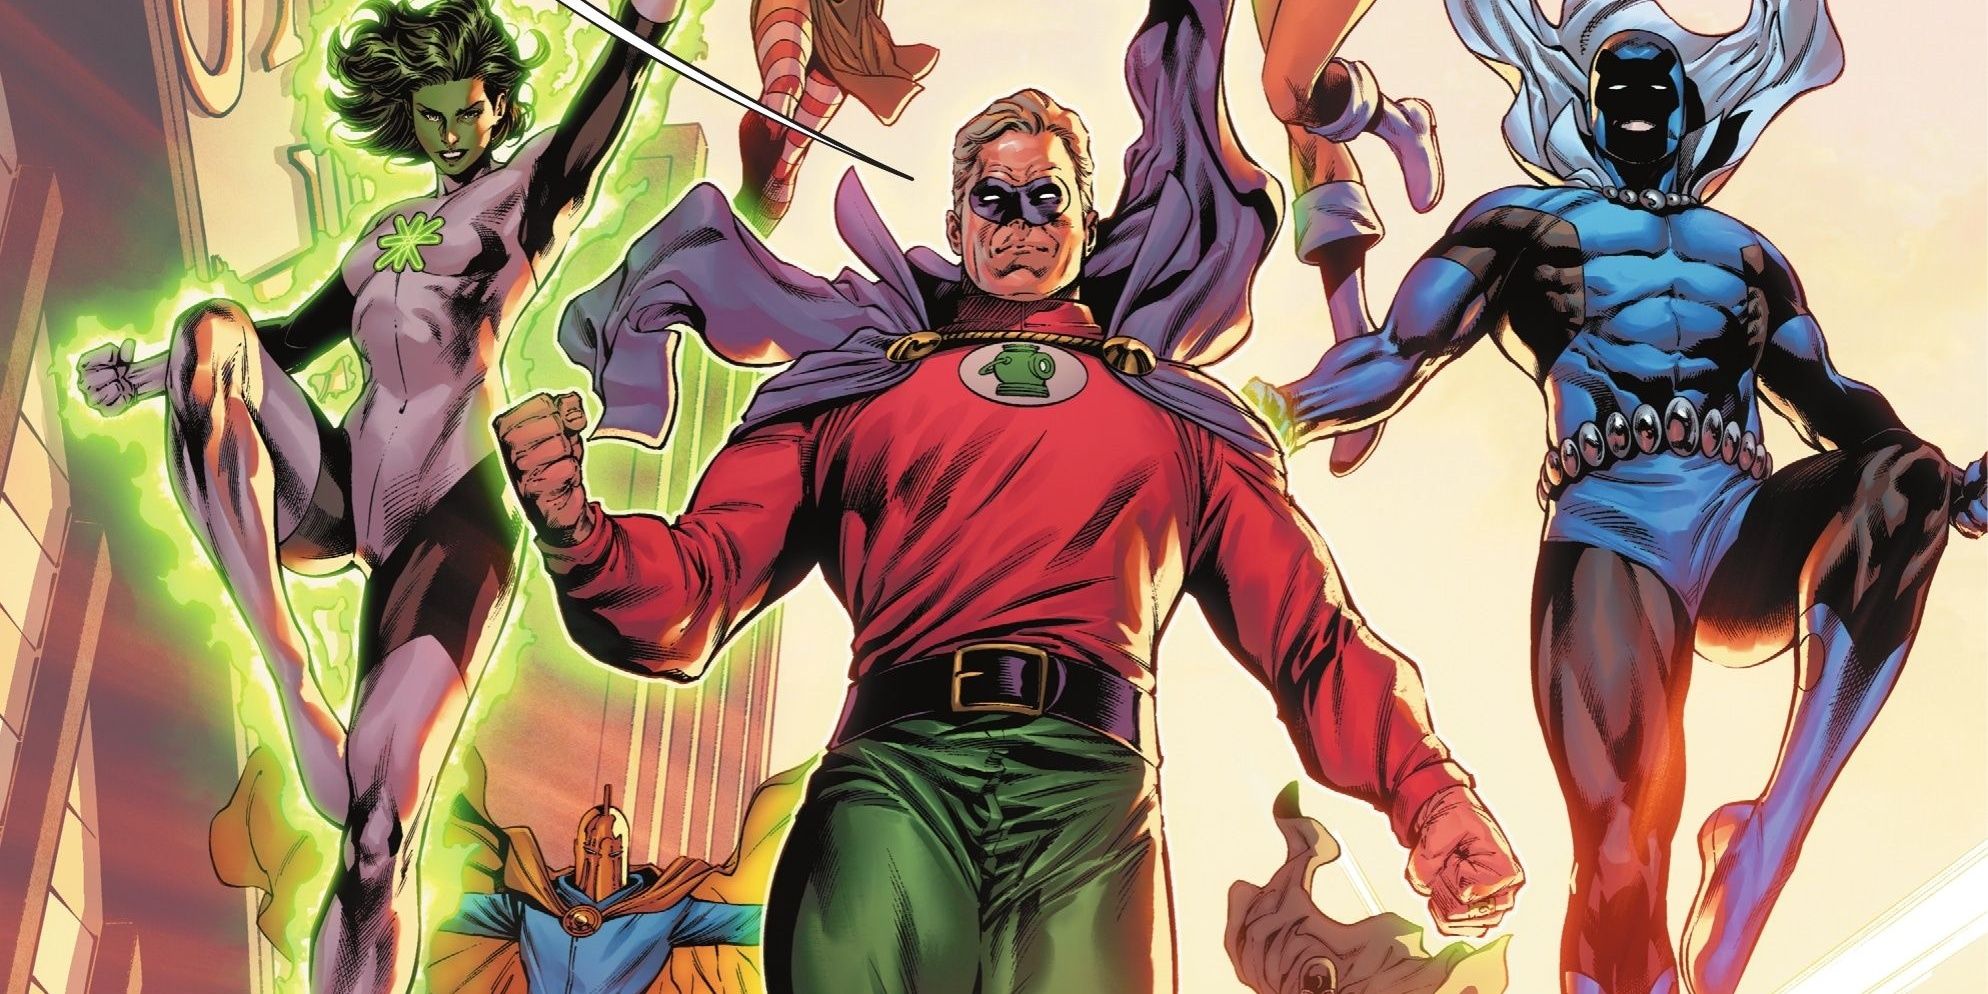 The Justice Society arrives in Dark Crisis 3.